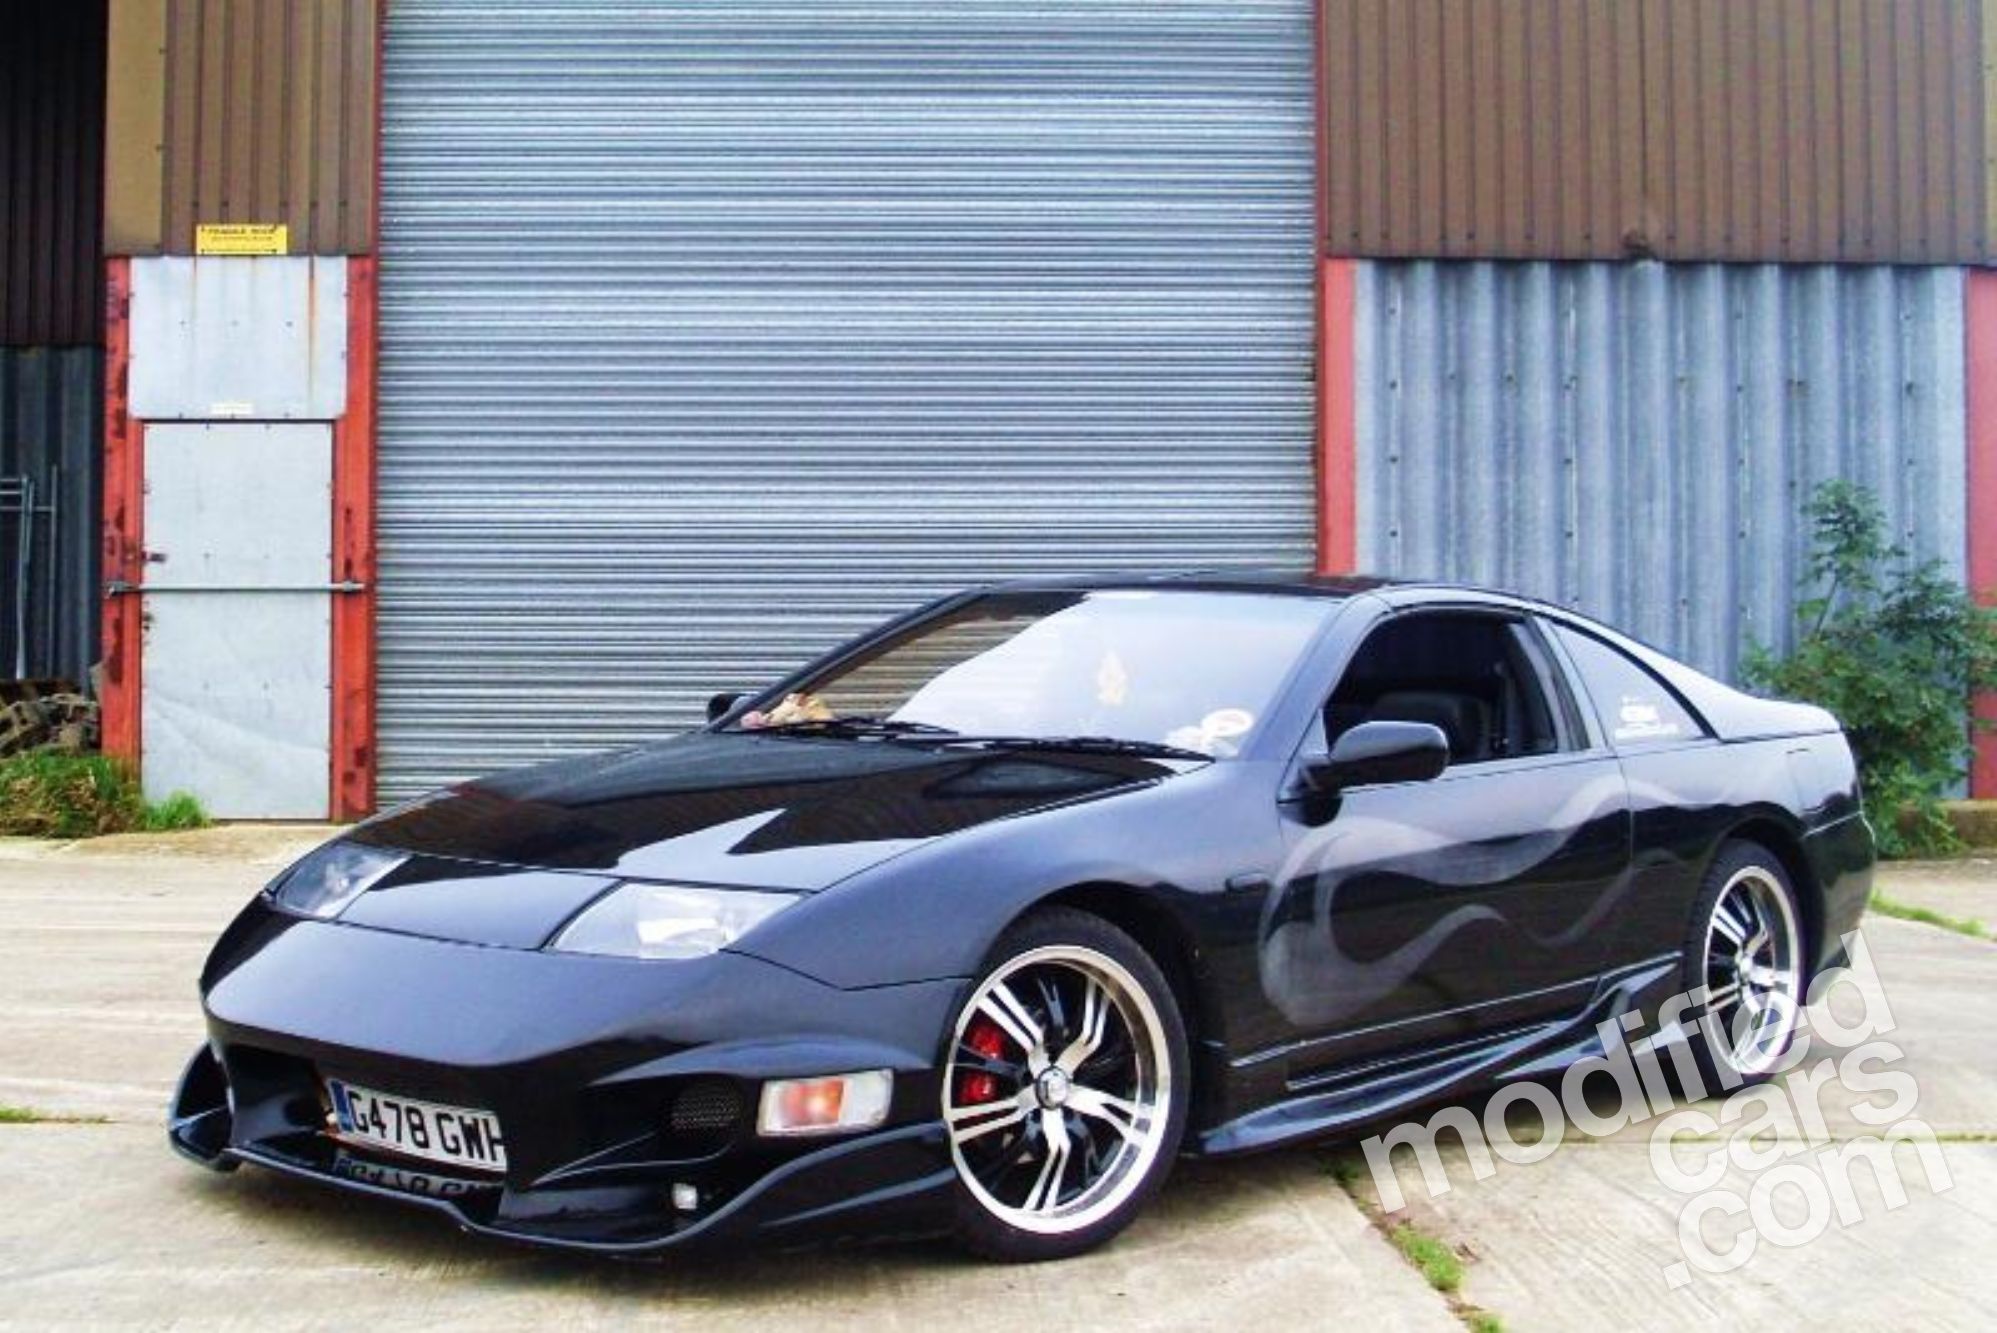 Nissan 300zx turbo review #5